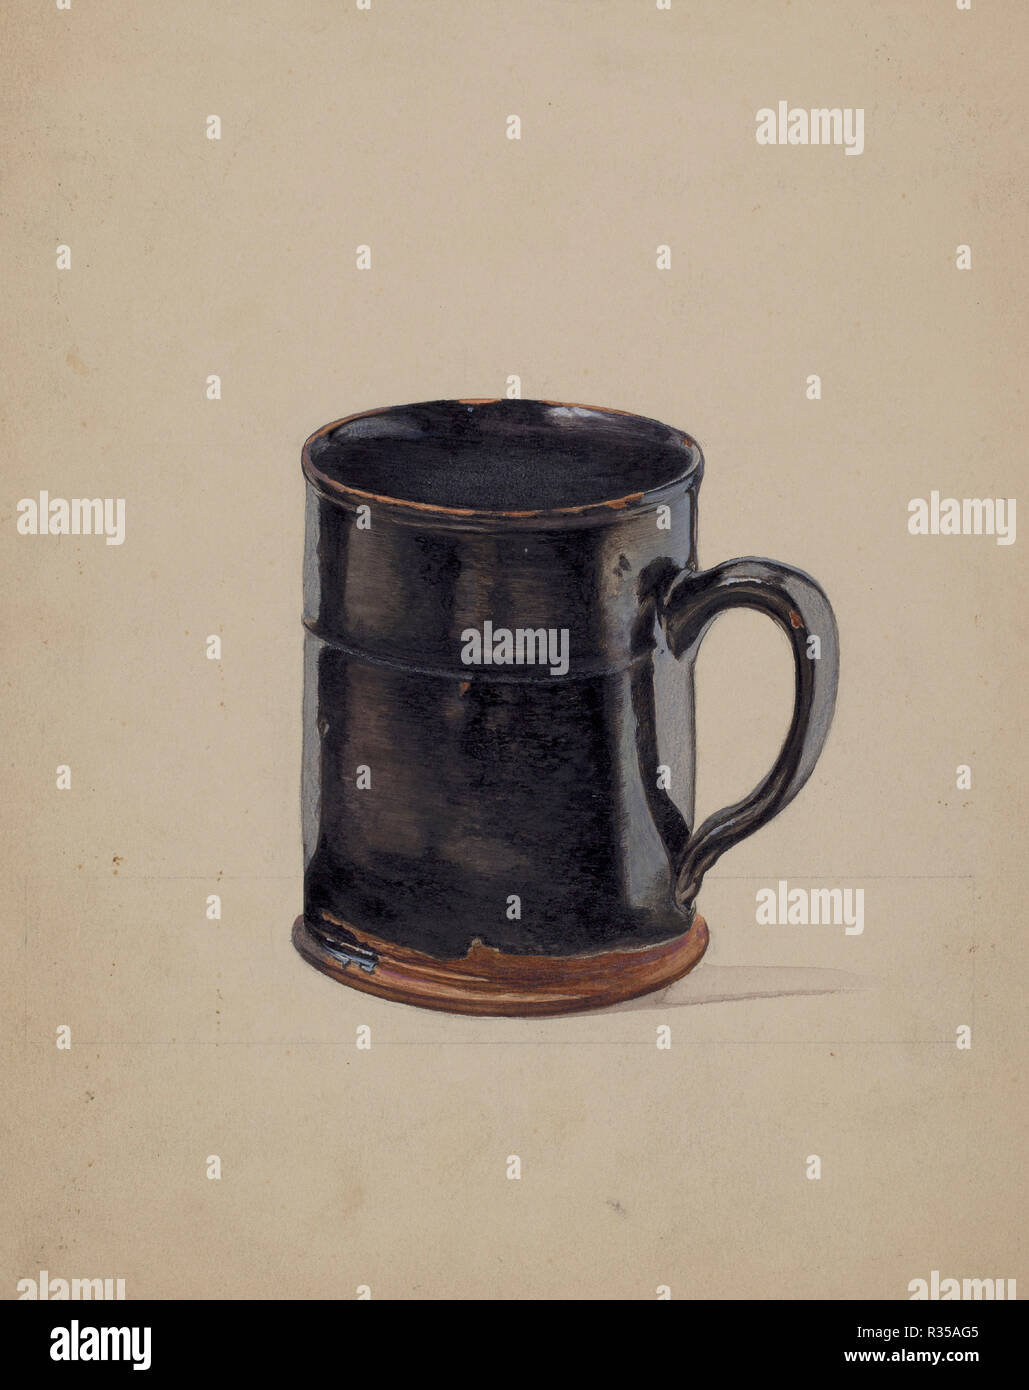 Tall Drinking Mug. Dated: 1935/1942. Dimensions: overall: 25.2 x 20.1 cm (9 15/16 x 7 15/16 in.). Medium: watercolor, colored pencil, gouache, and graphite on paper. Museum: National Gallery of Art, Washington DC. Author: American 20th Century. Stock Photo